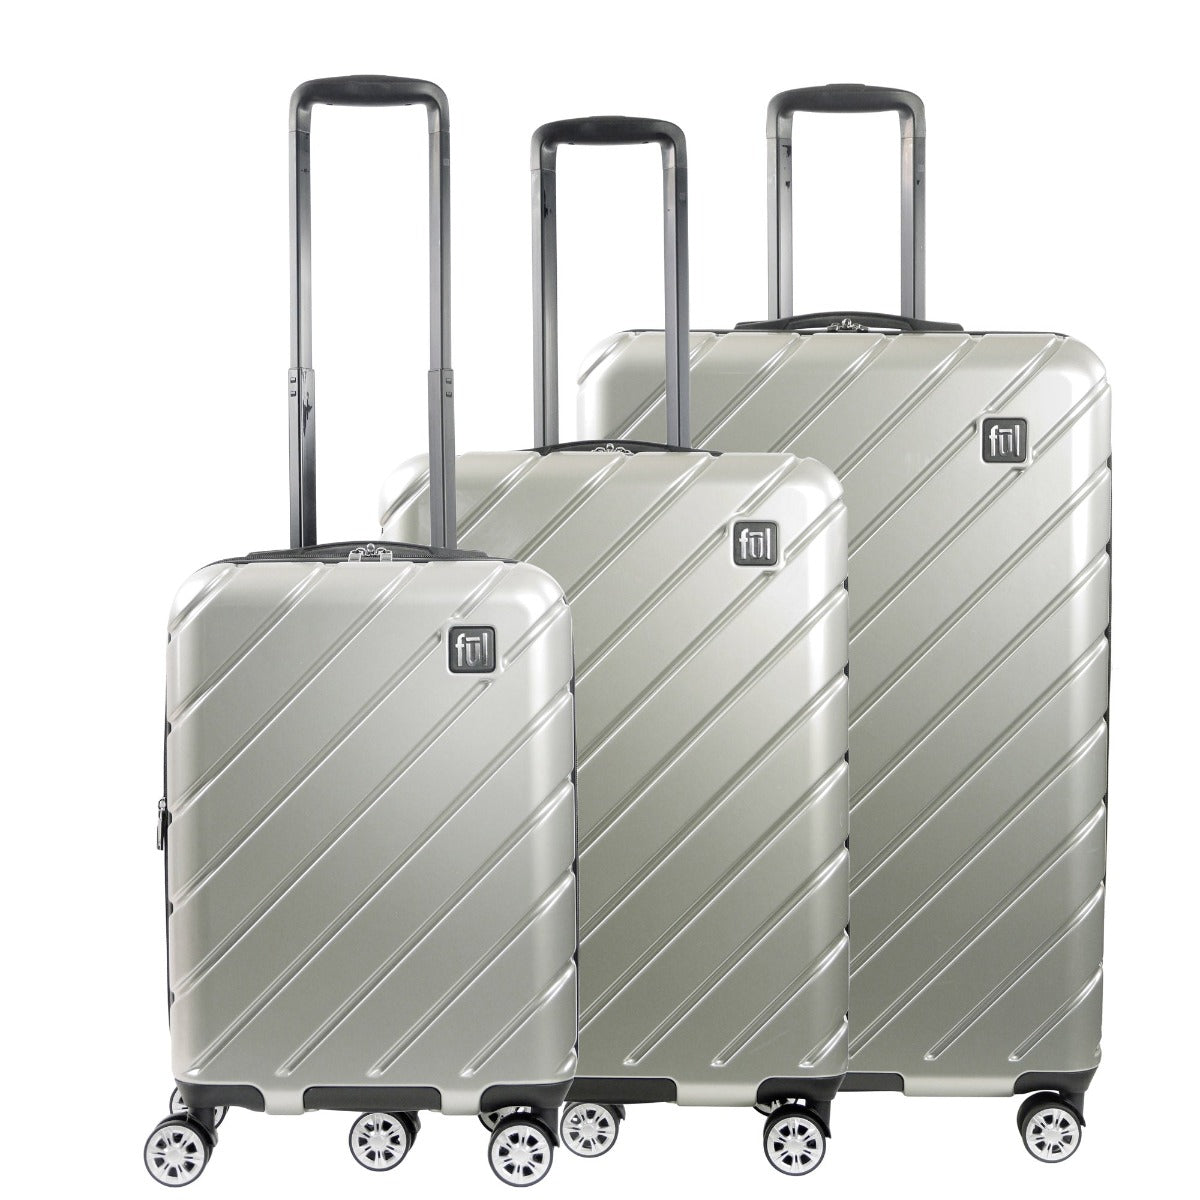 Velocity 3 pcs set Hardside Spinner Suitcase Checked Luggage Silver 23 inch 27 inch 31 inch